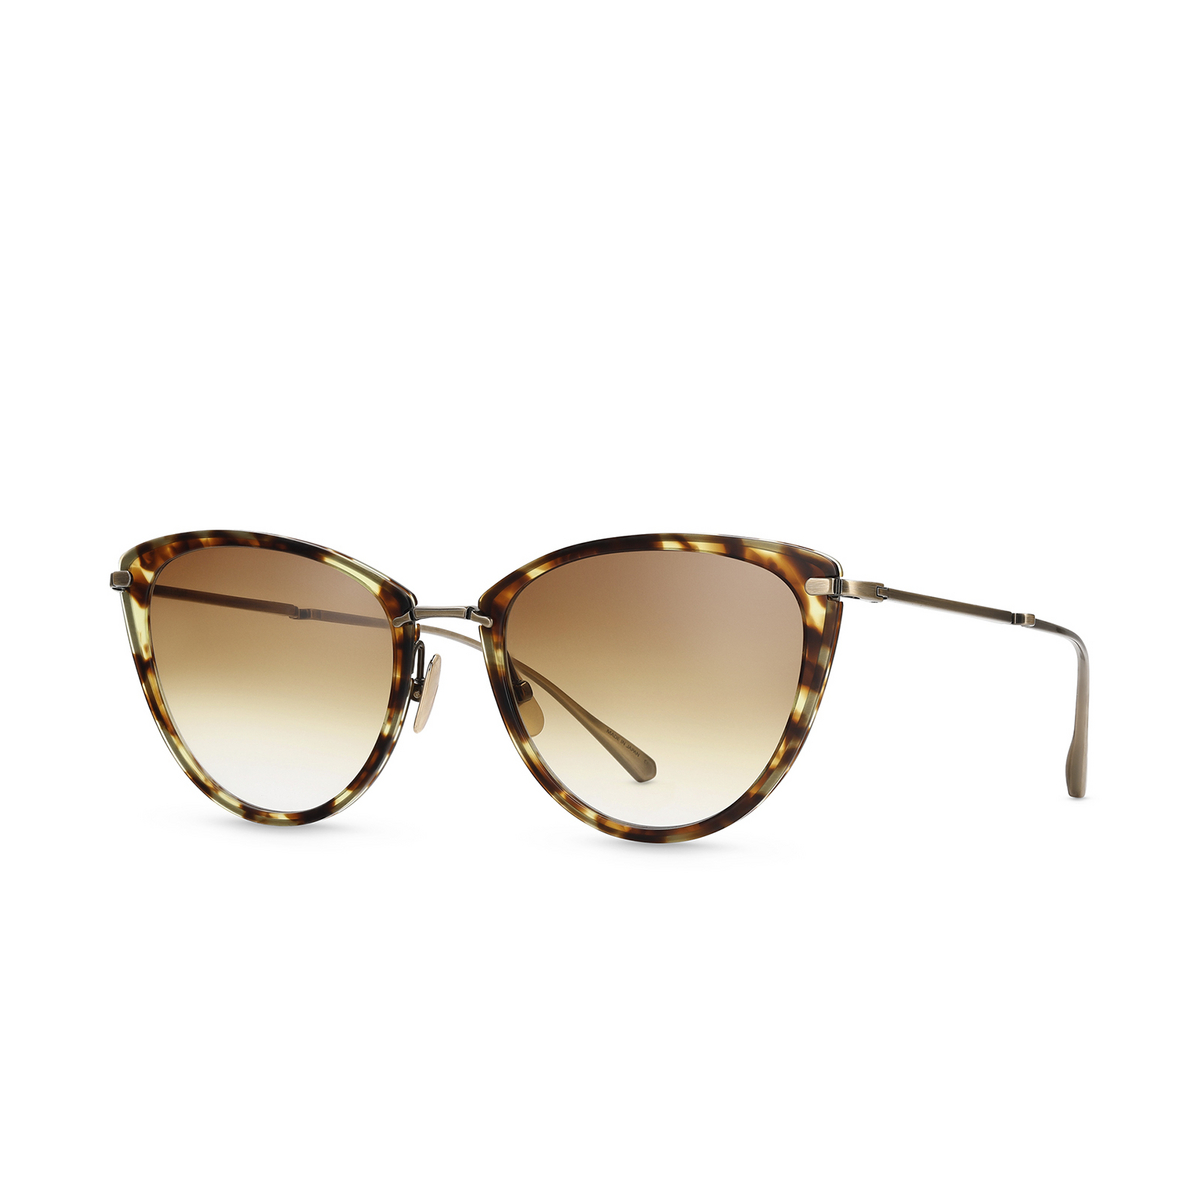 Mr. Leight® Butterfly Sunglasses: Beverly S color Tort-atg/wbg - three-quarters view.